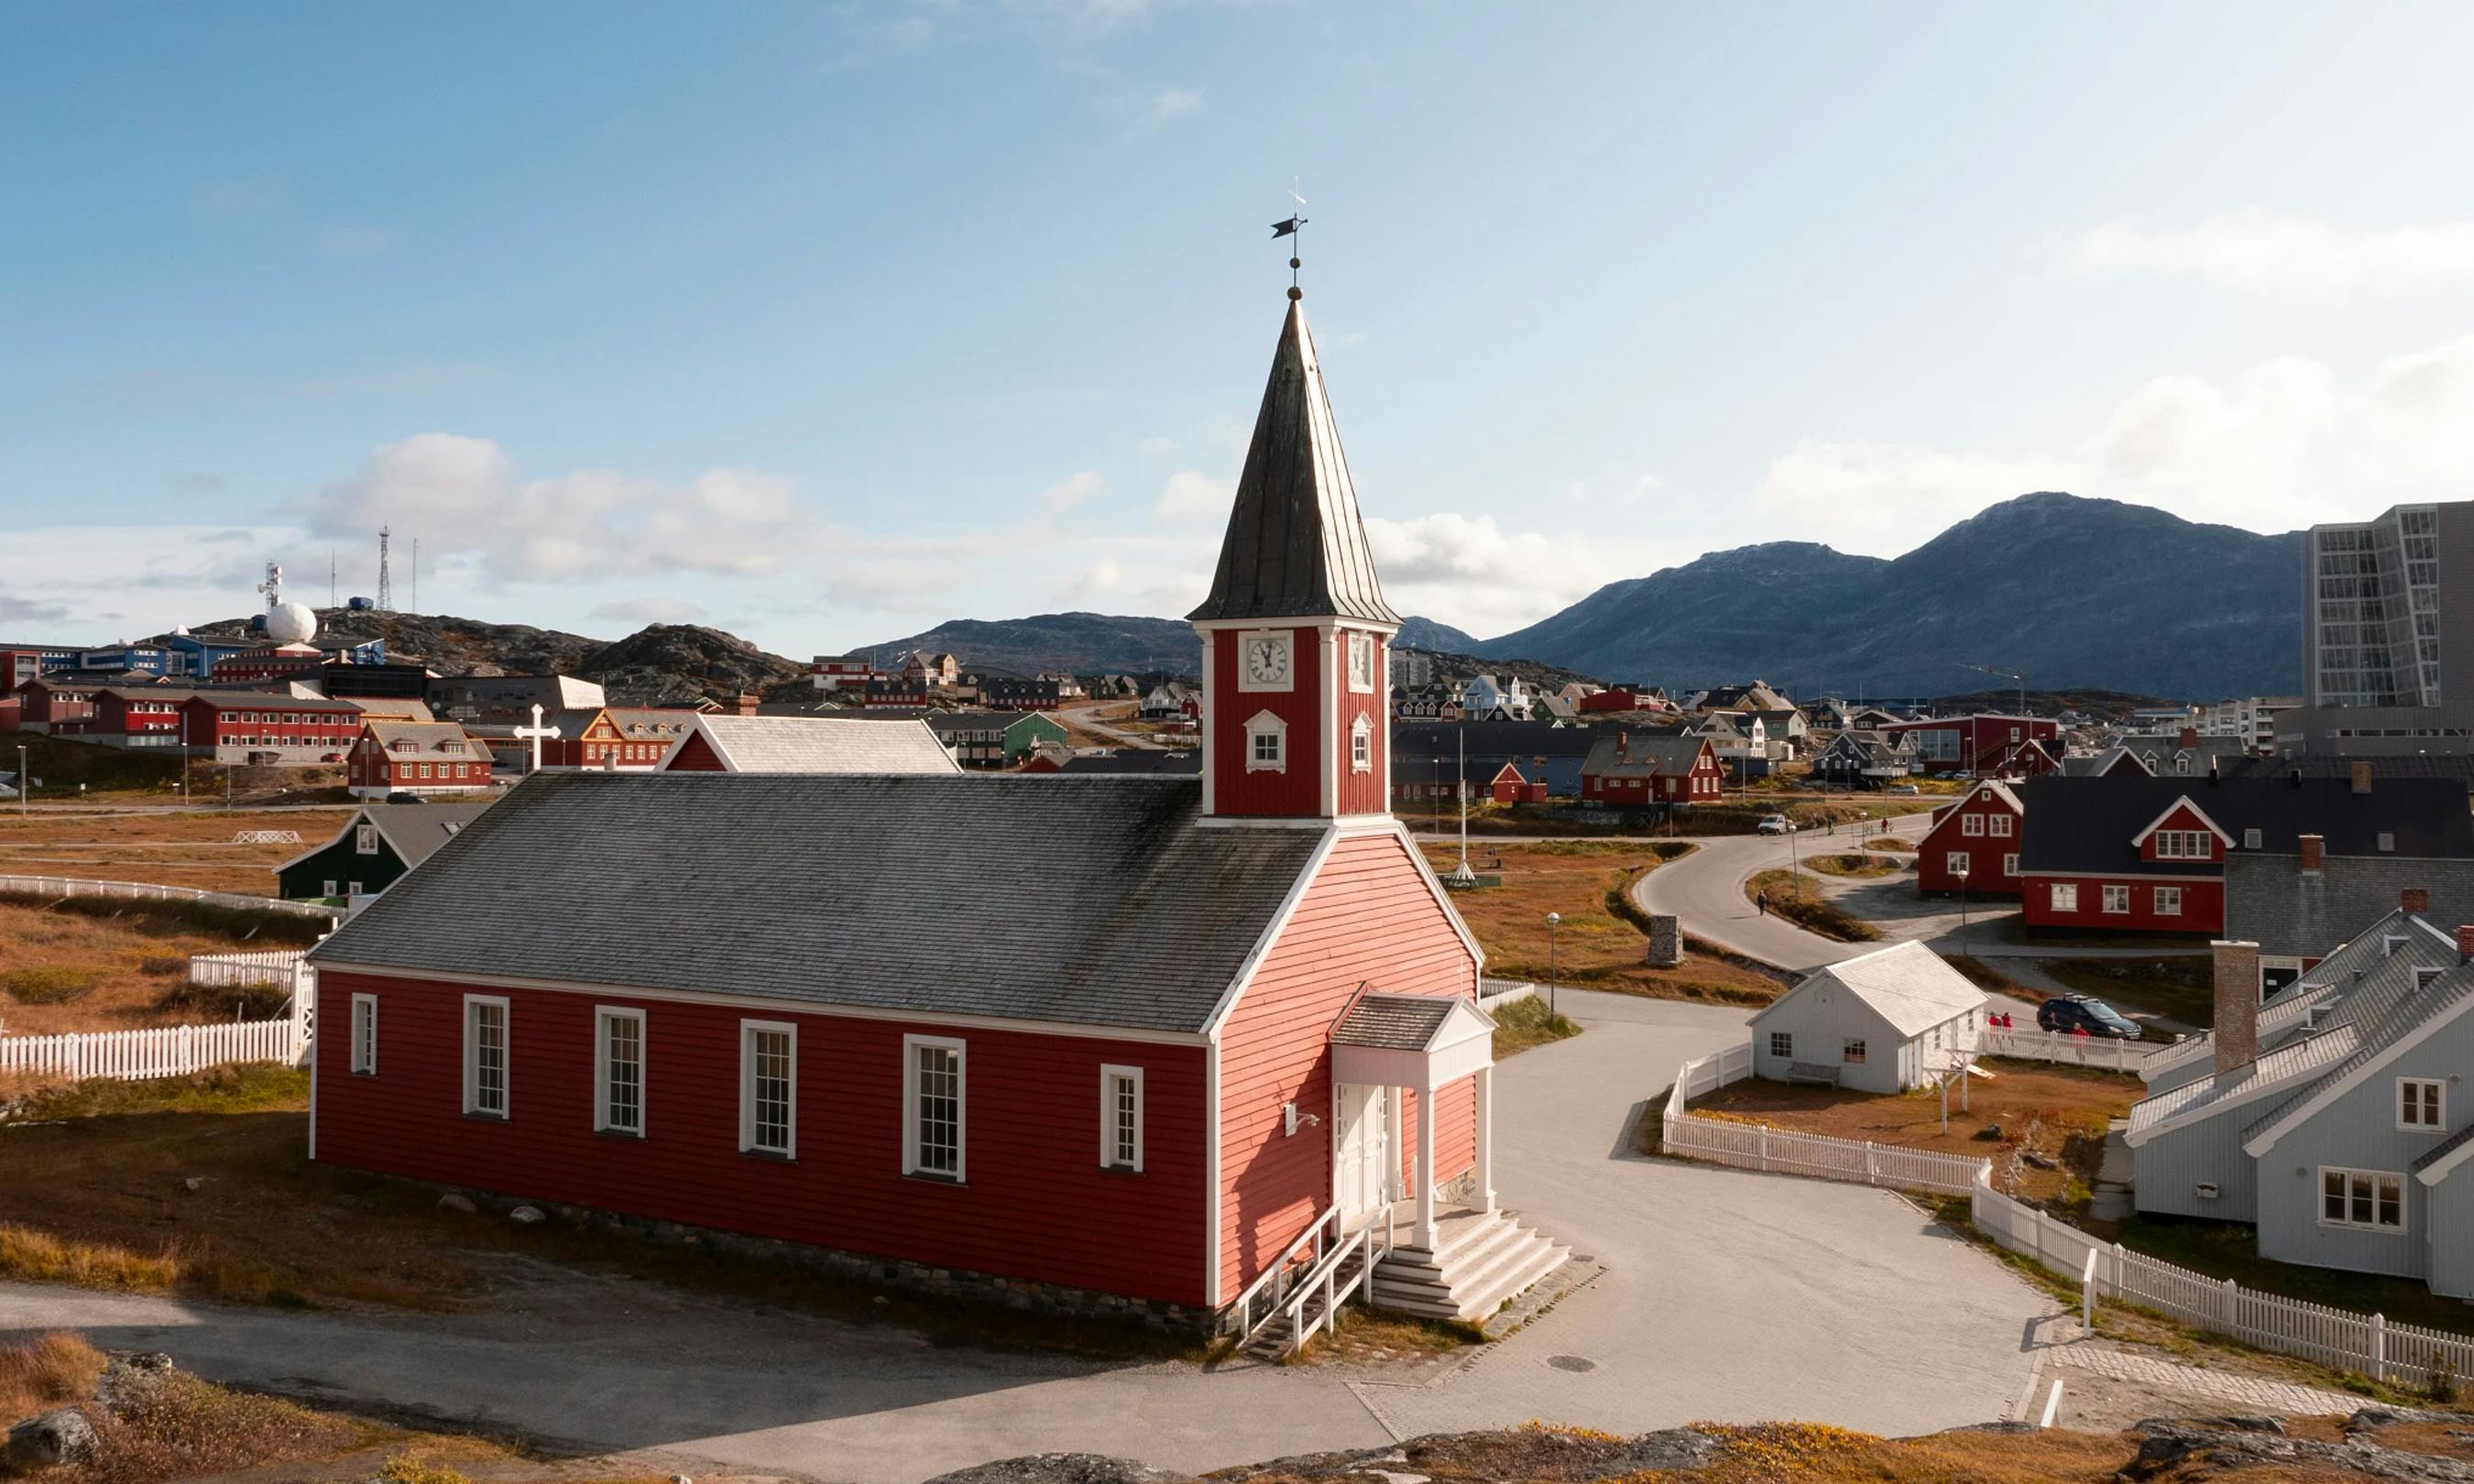 In Greenland, Nuuk Cathedral offers a glimpse of life here